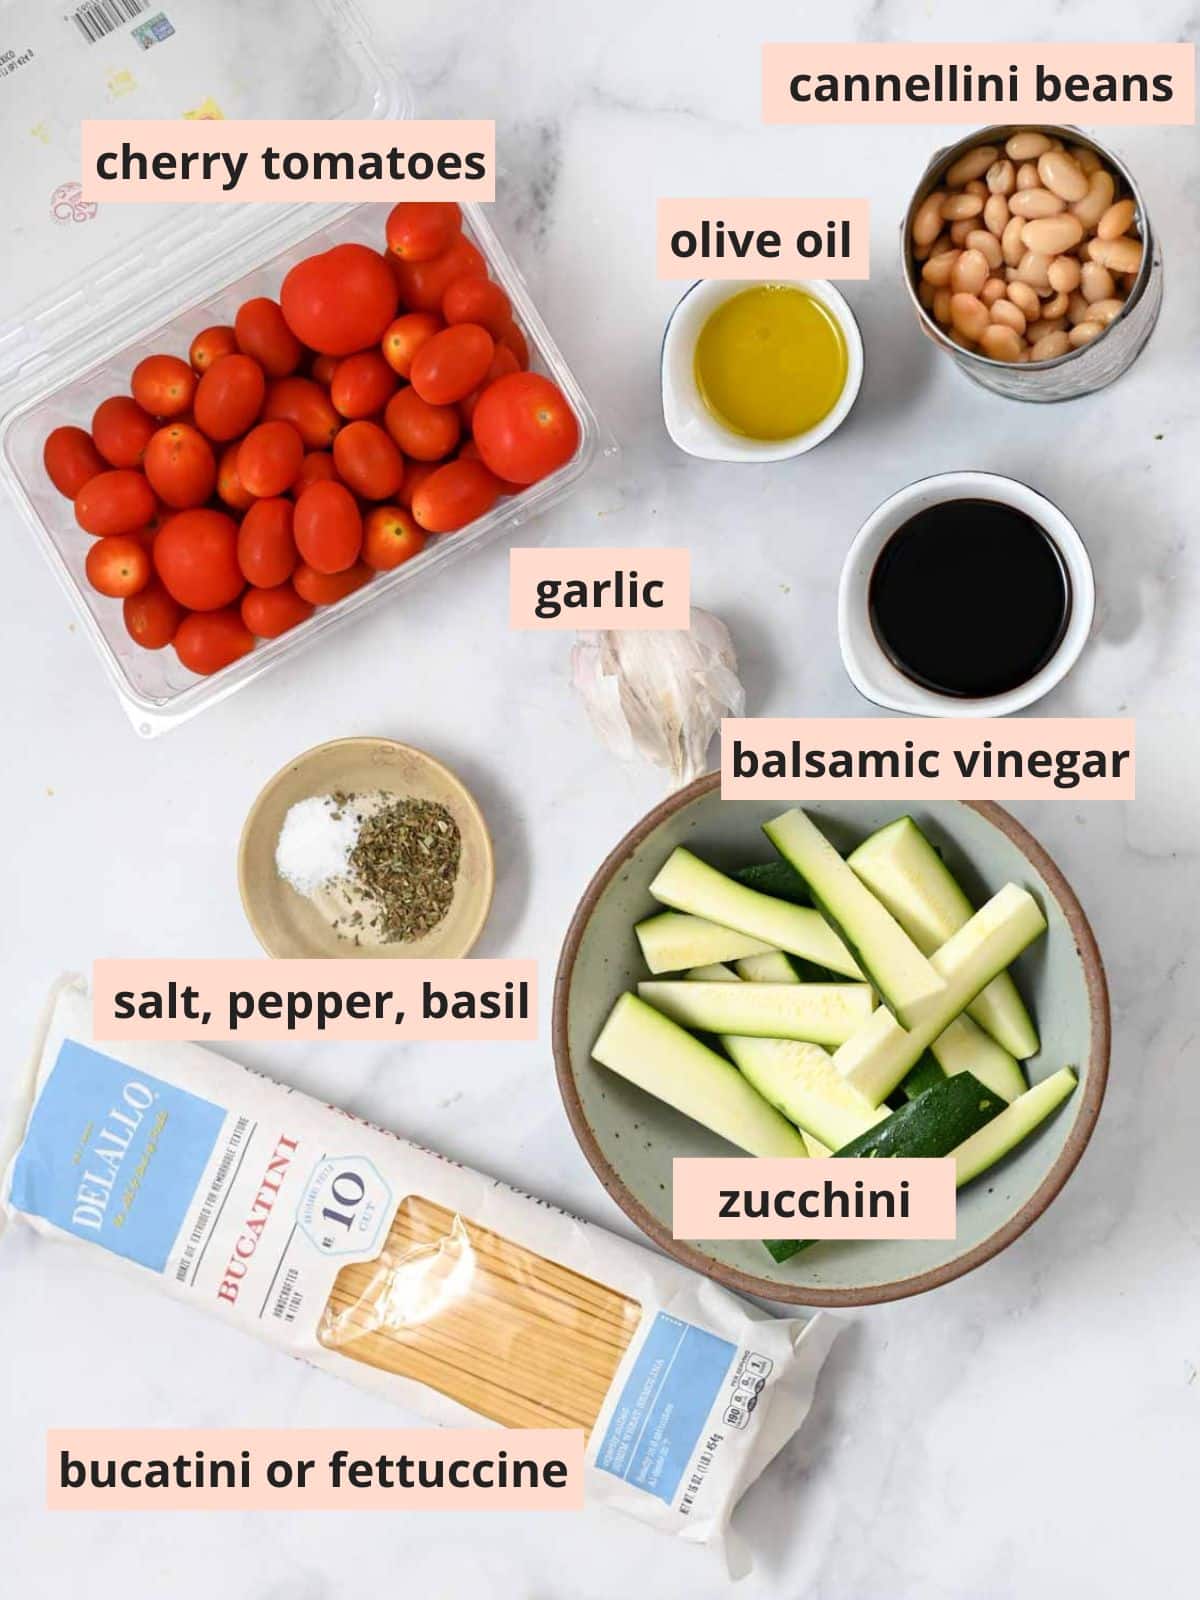 Labeled ingredients used to make tomato and zucchini pasta.